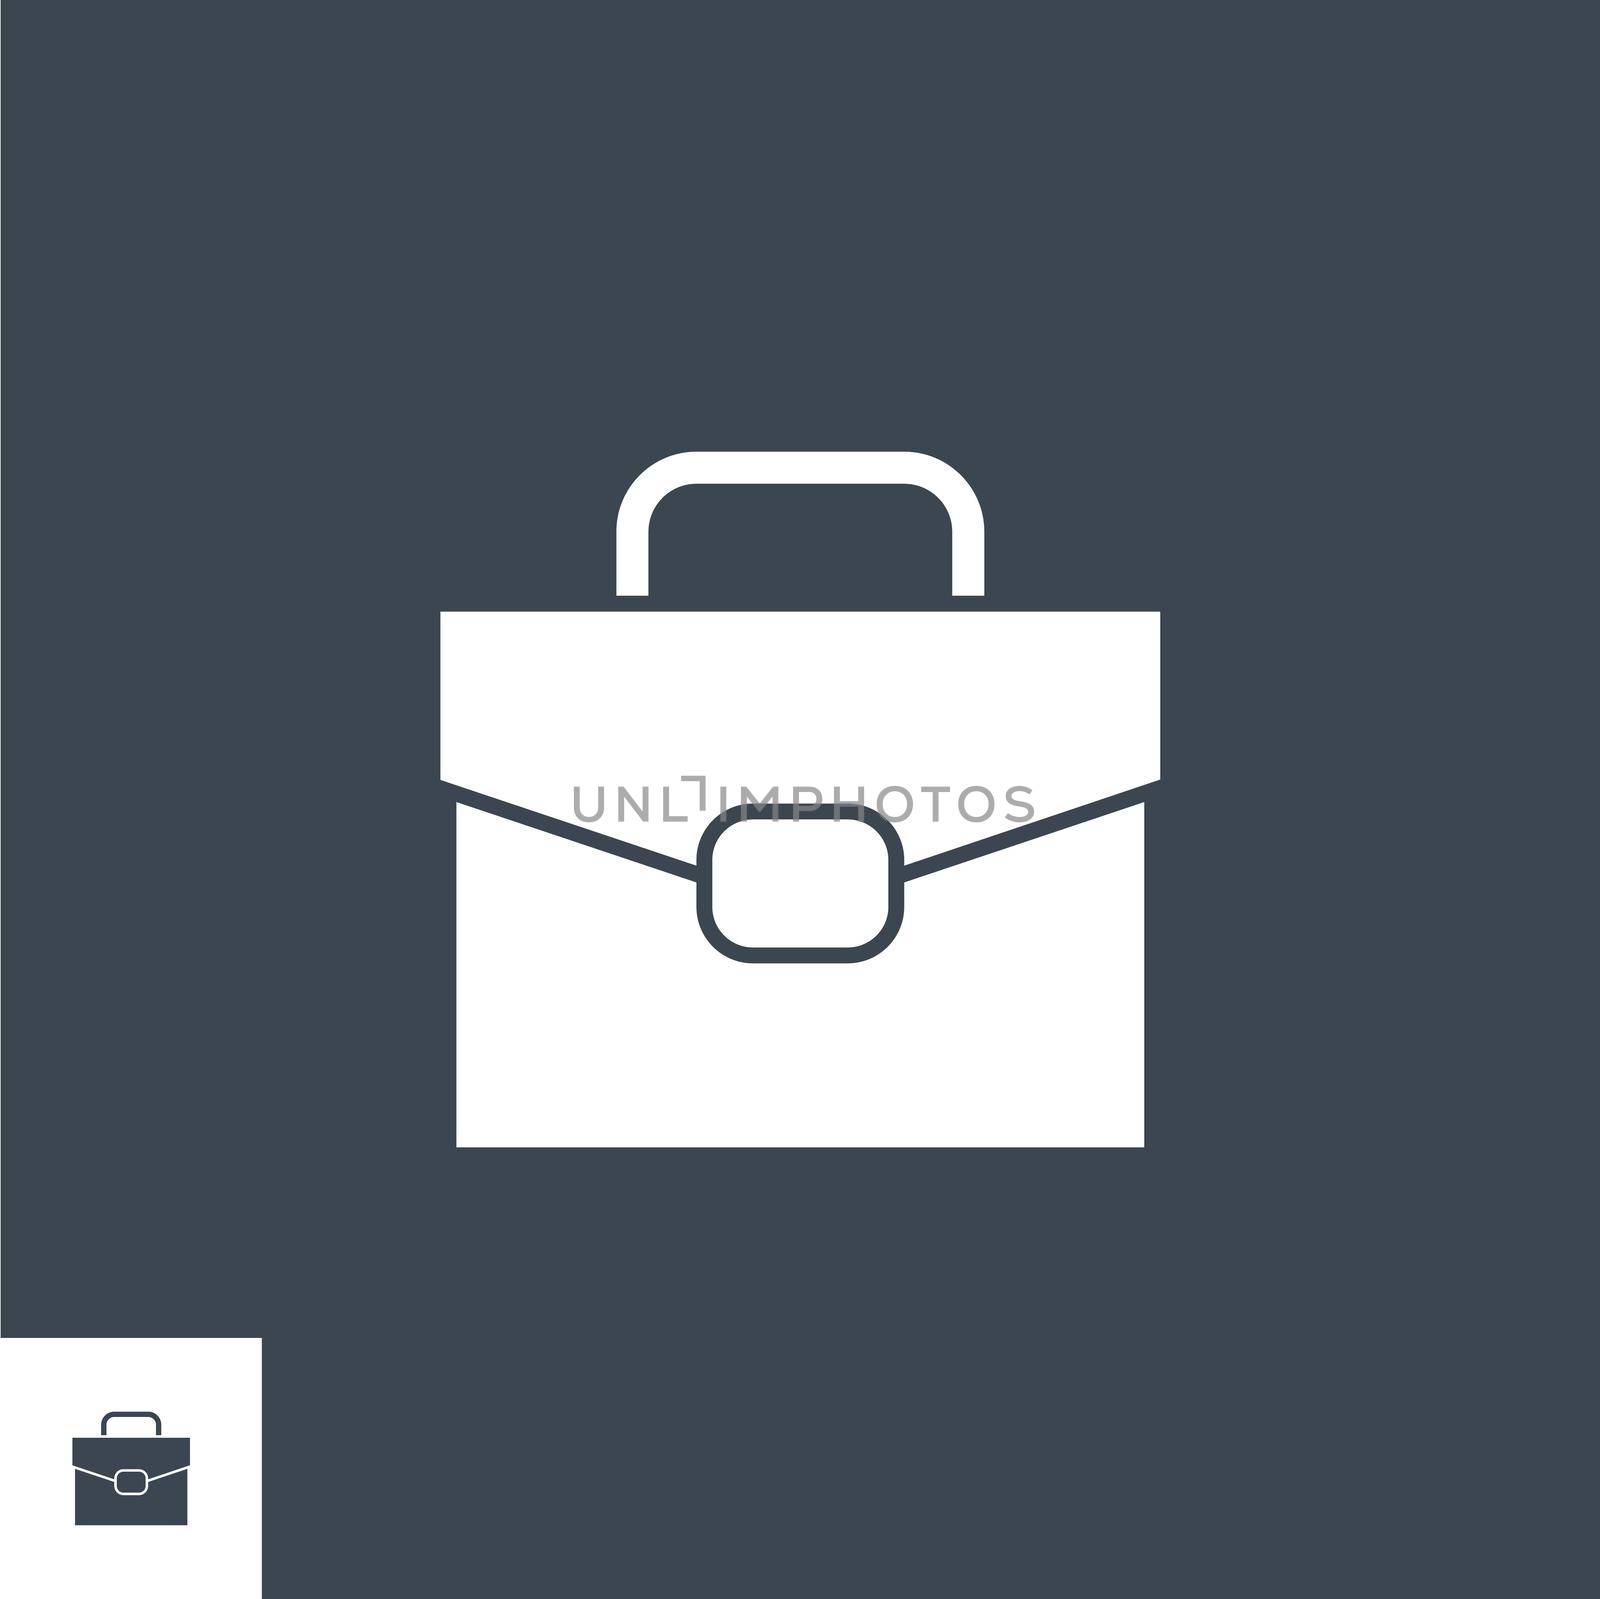 Briefcase related vector glyph icon. Isolated on black background. Vector illustration.